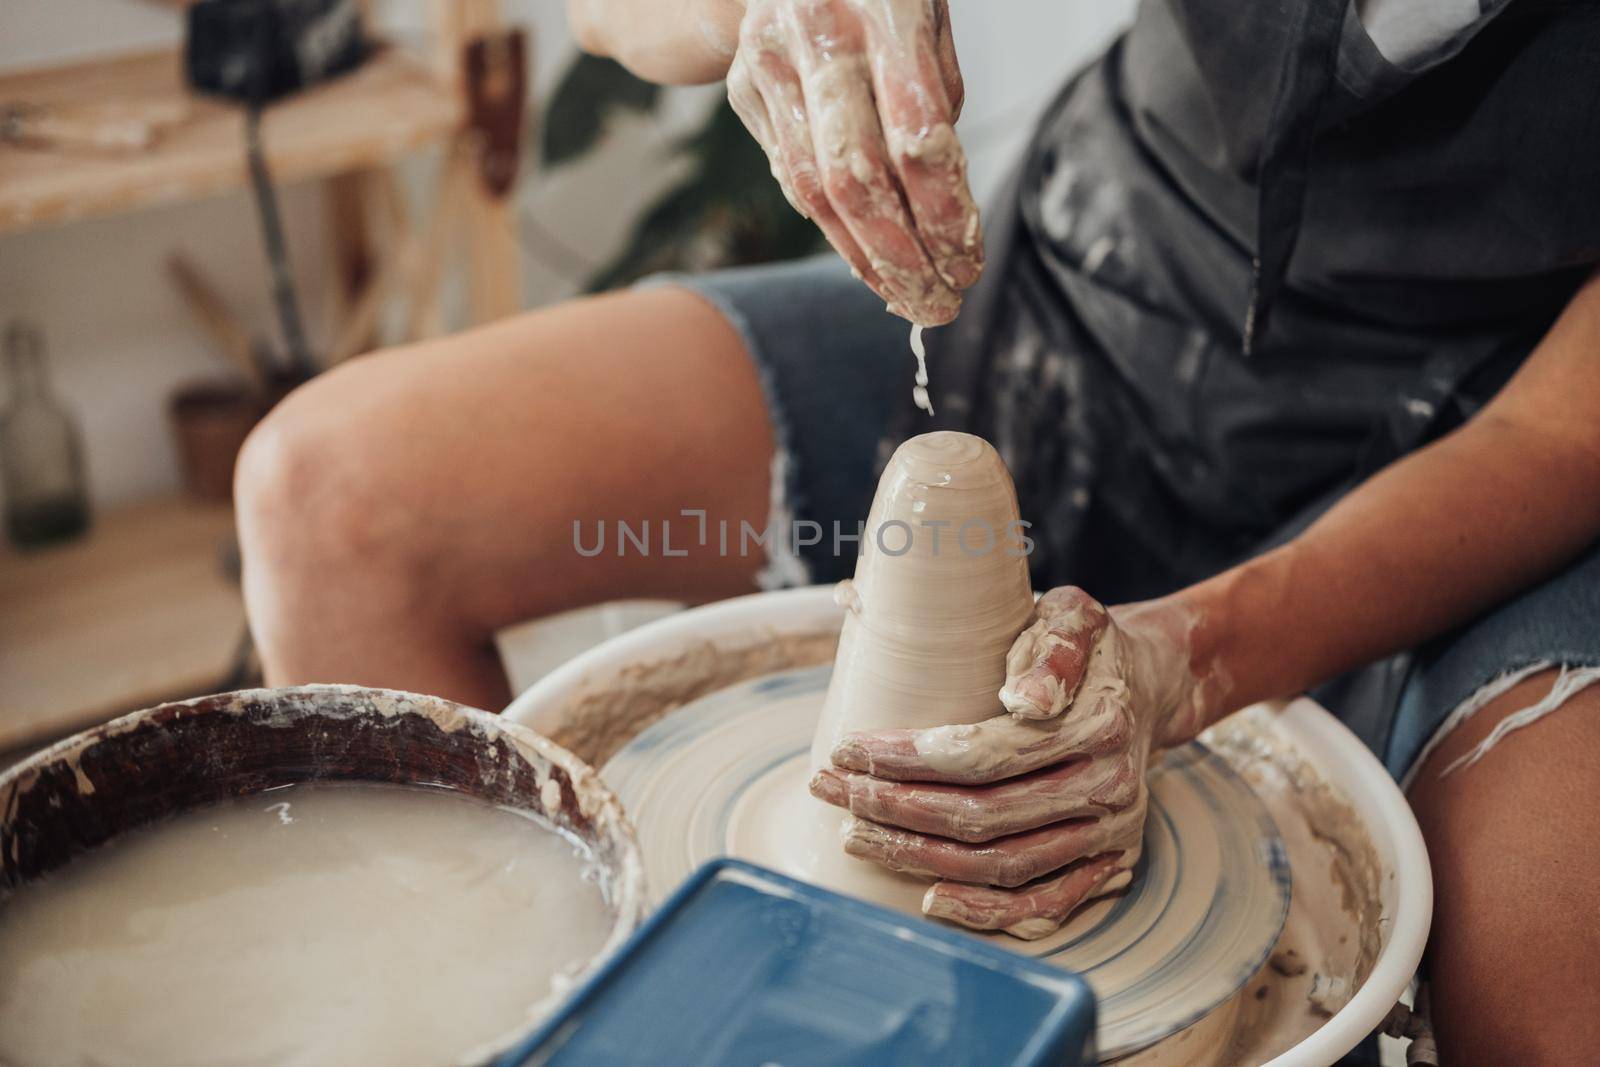 Process of Creating Clay Pot, Unrecognisable Female Master Working on Pottery Wheel in Studio